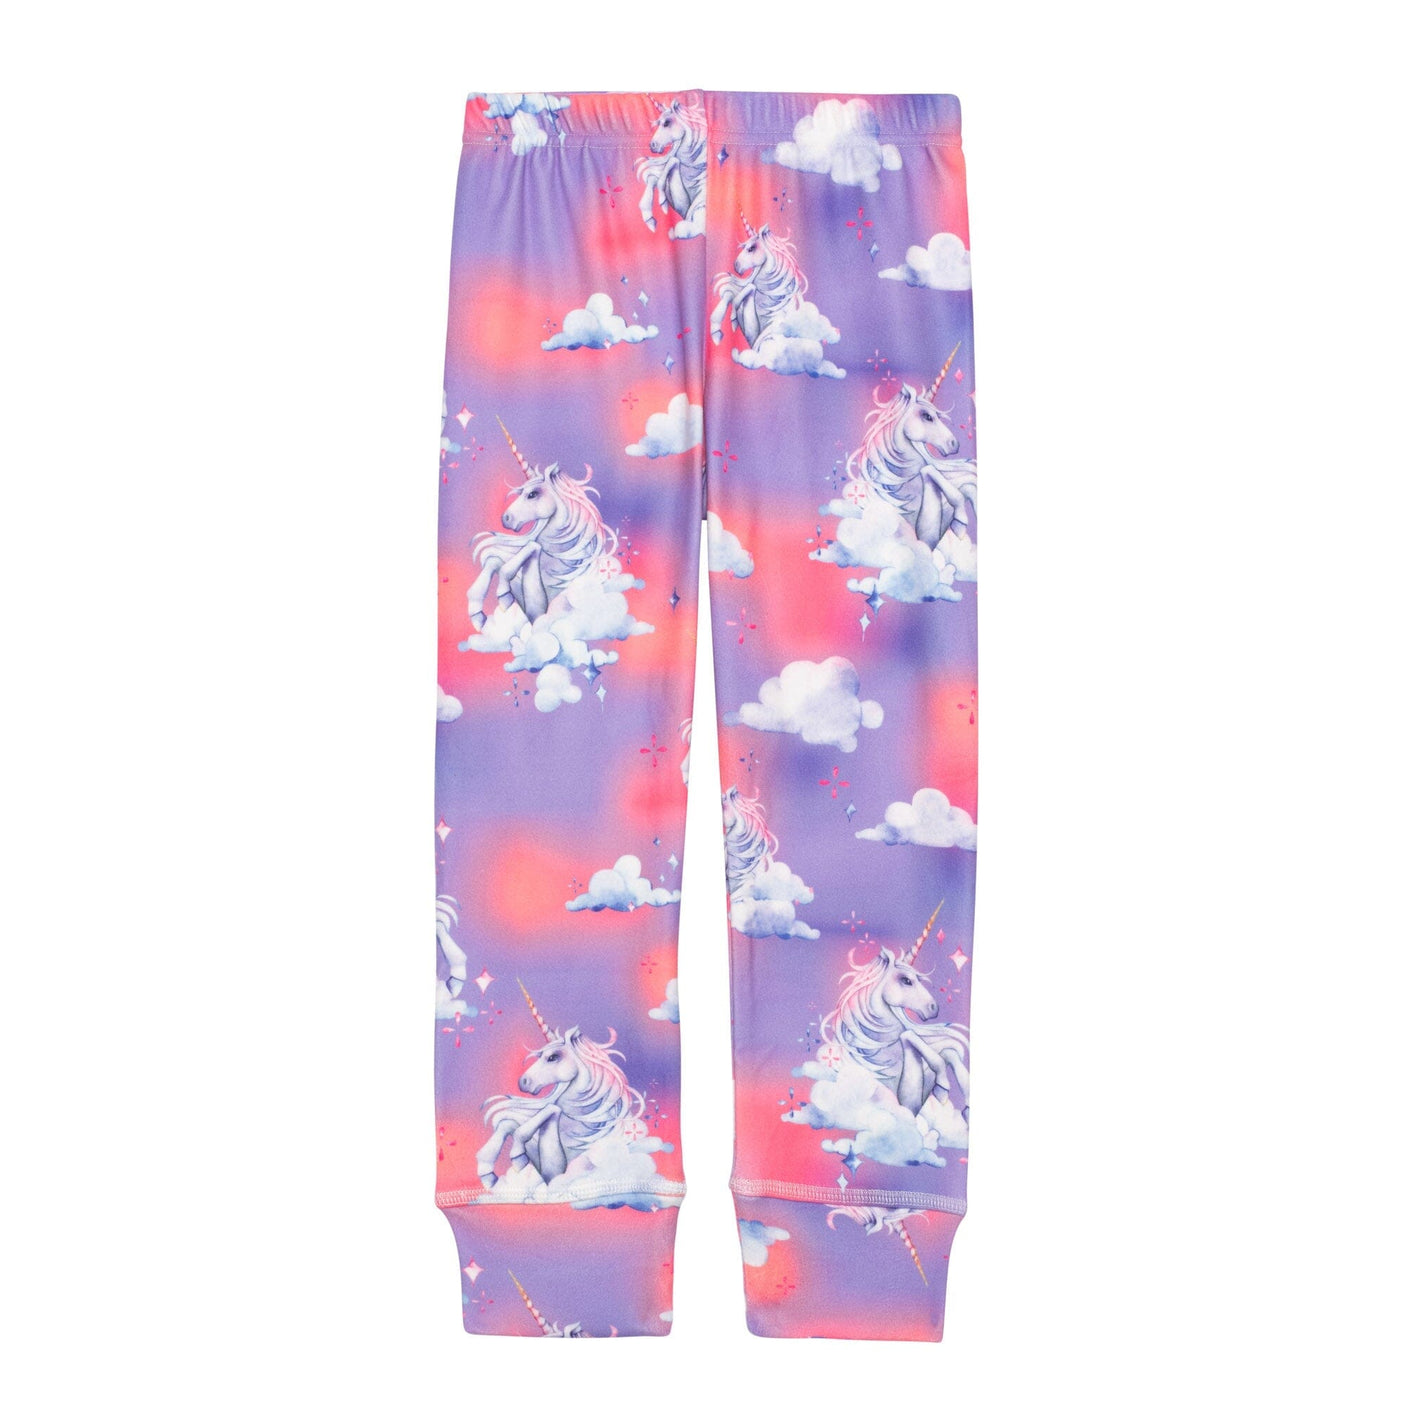 Two Piece Thermal Underwear Set Lavender With Unicorns In The Clouds Print-3